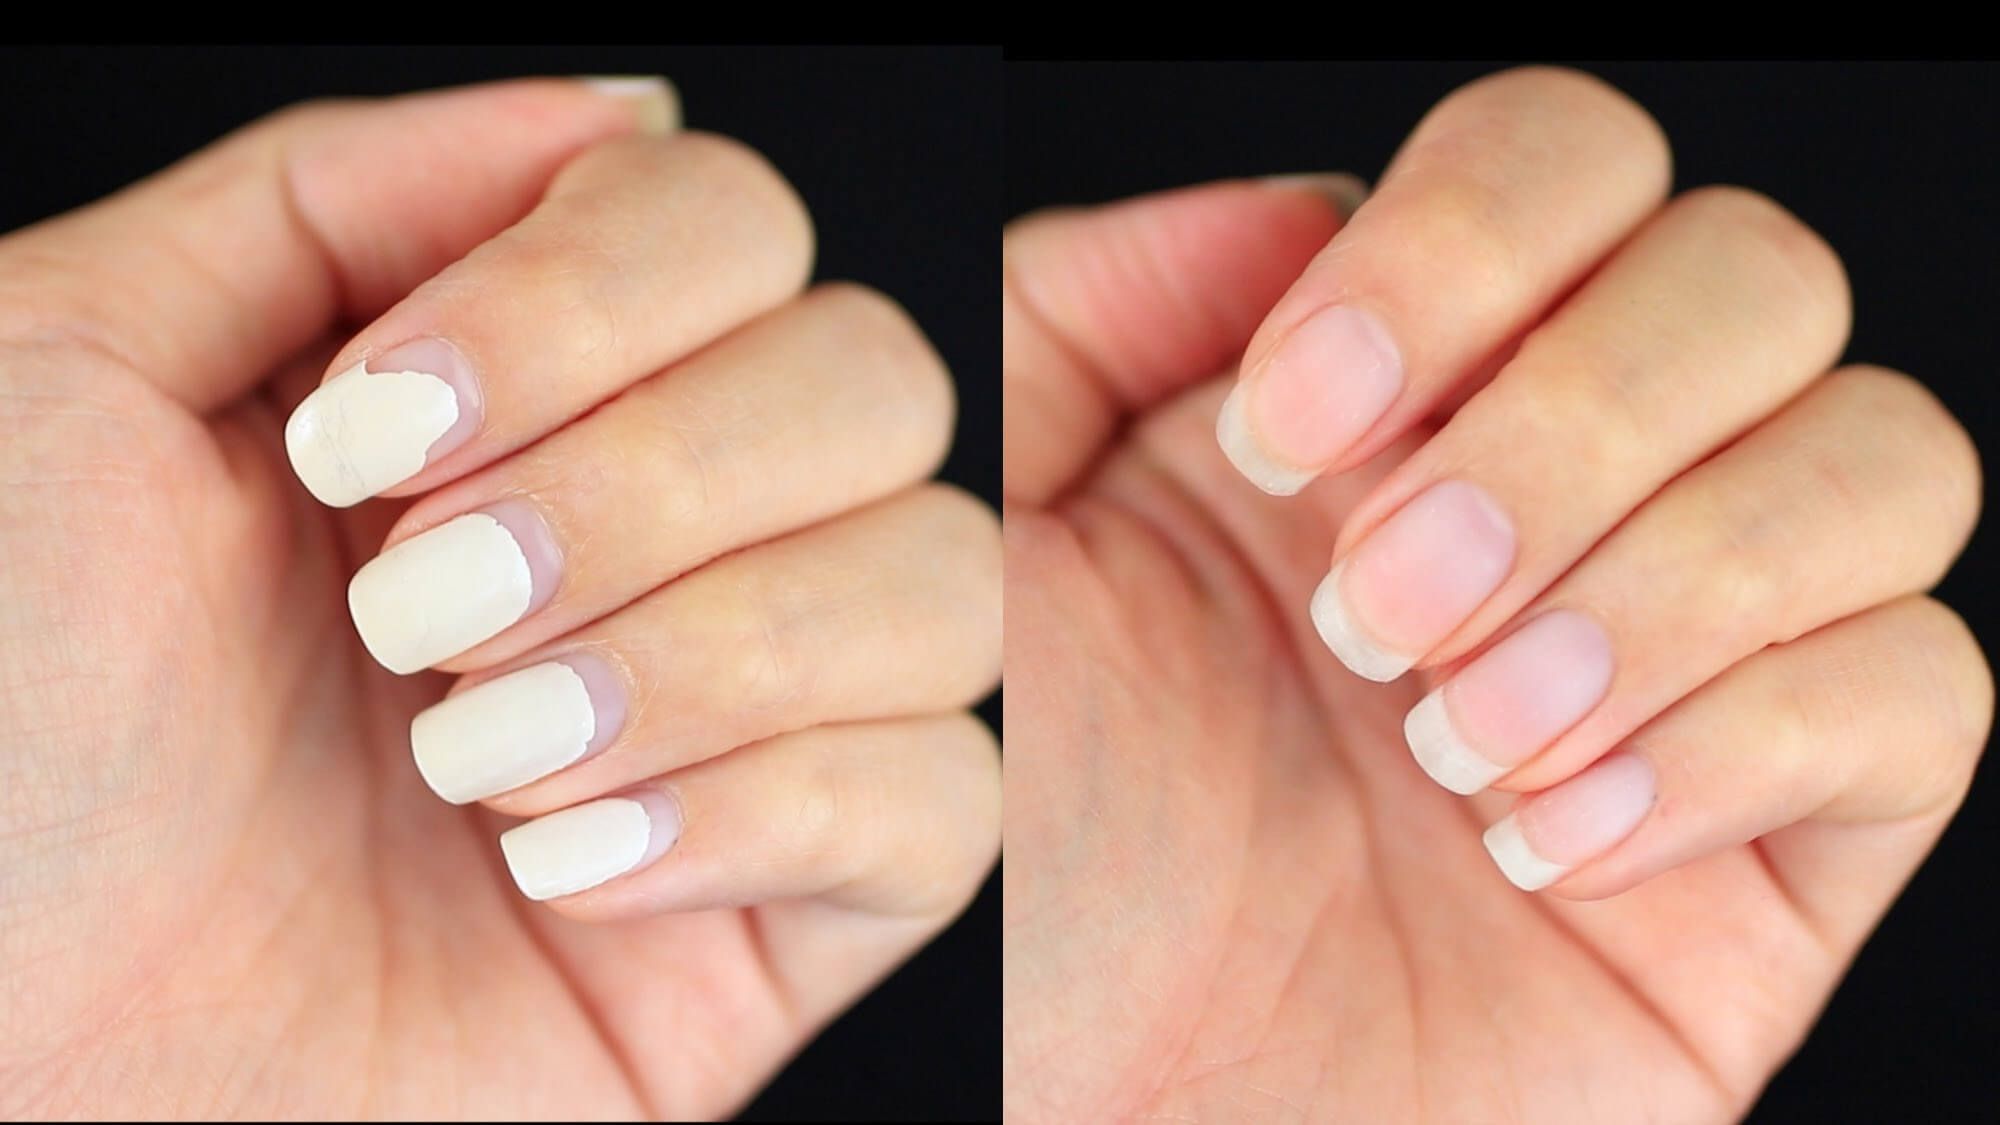 How to Remove Gel Nails on Your Own